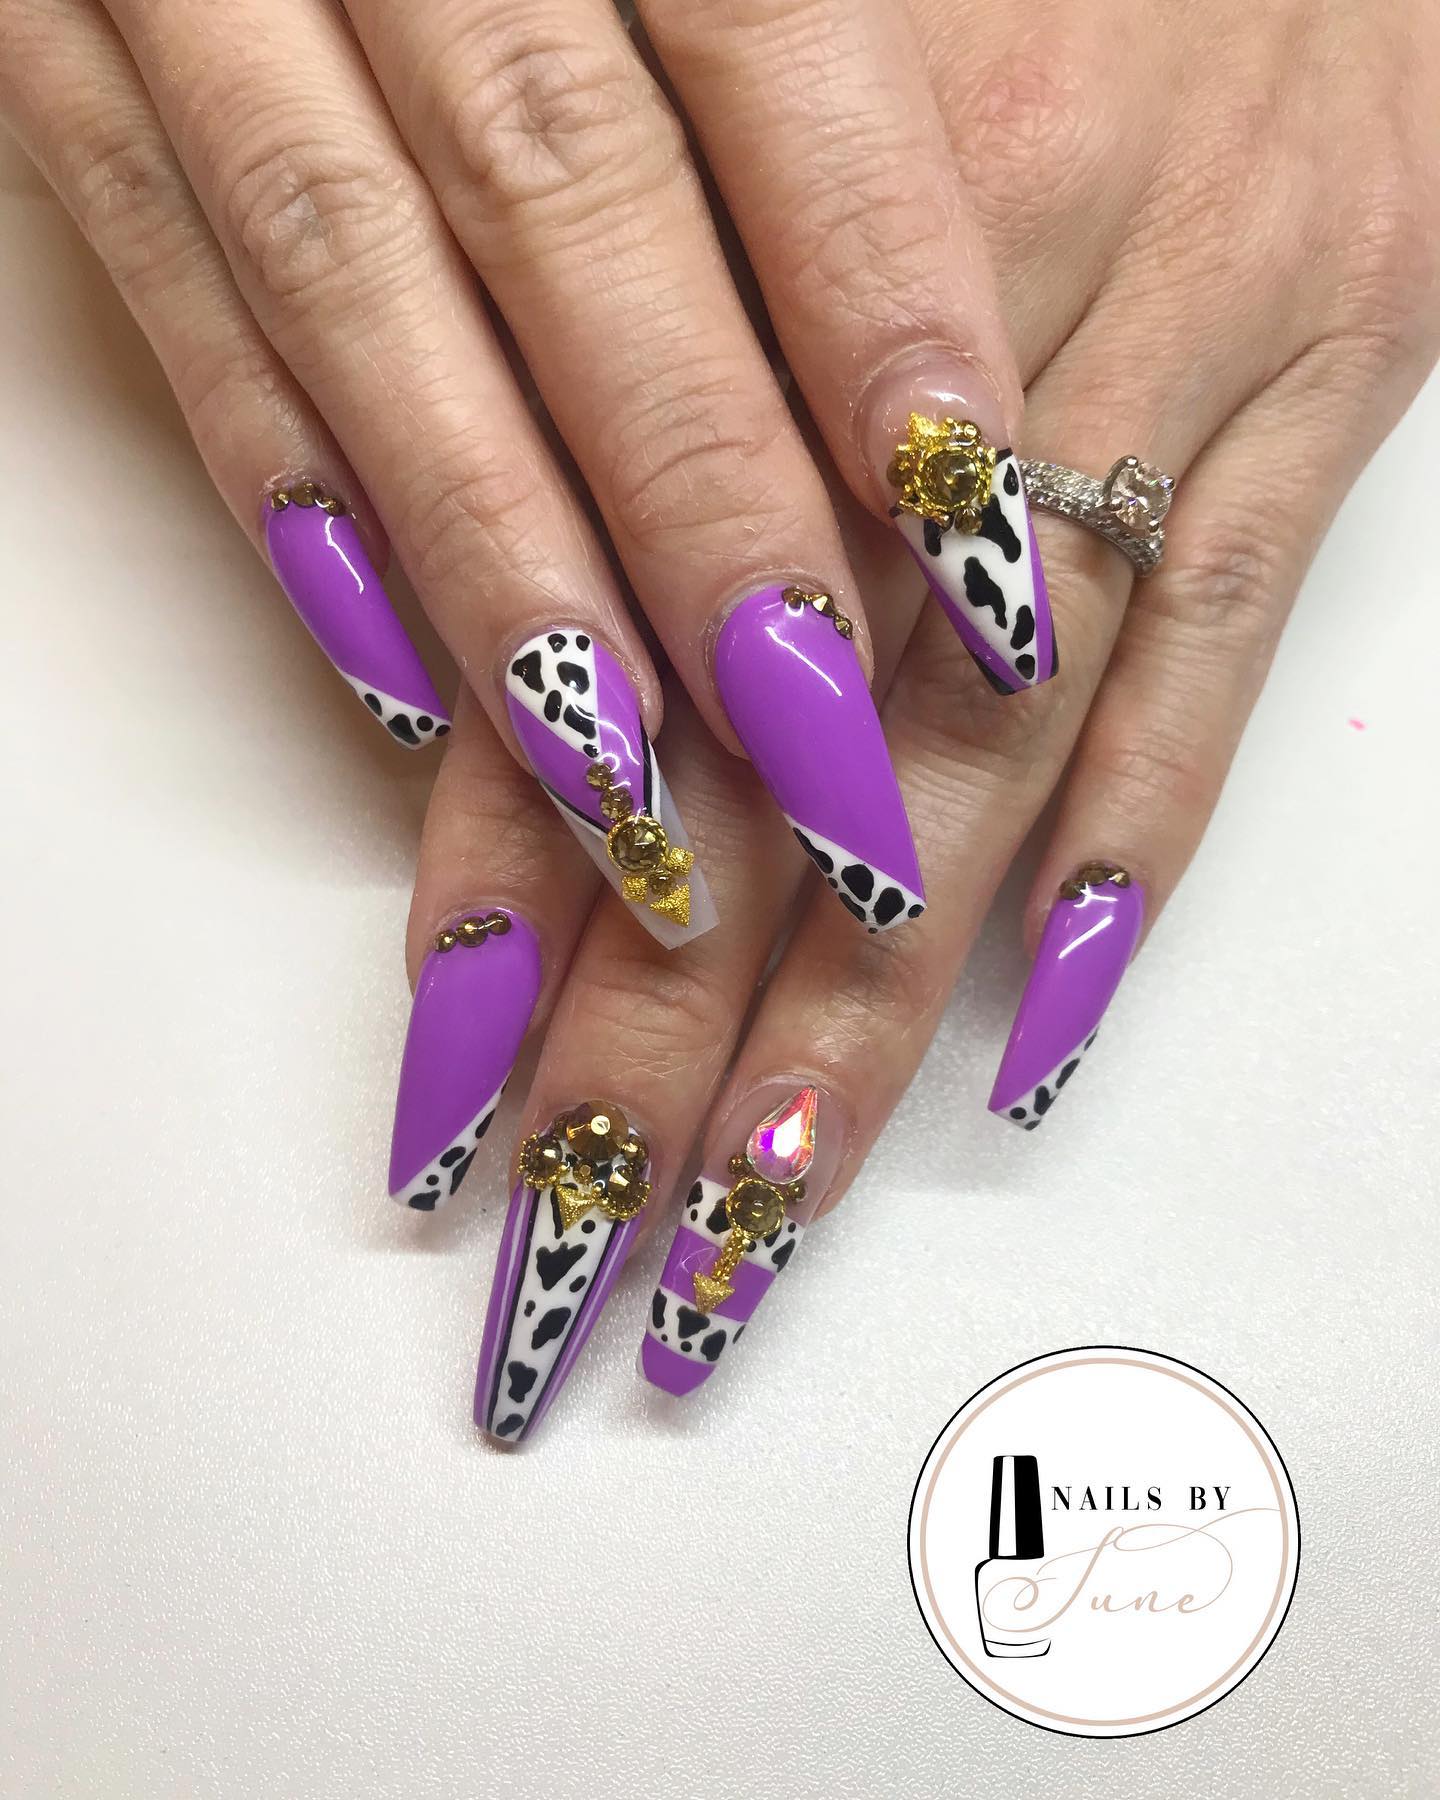 Wanna look like a queen with your nail design? Here is an awesome purple cow print nail art! In the shape of triangles, cow prints offer a perfect look. If you want more of that, stick shiny stones on top of your nails to shine brighter.